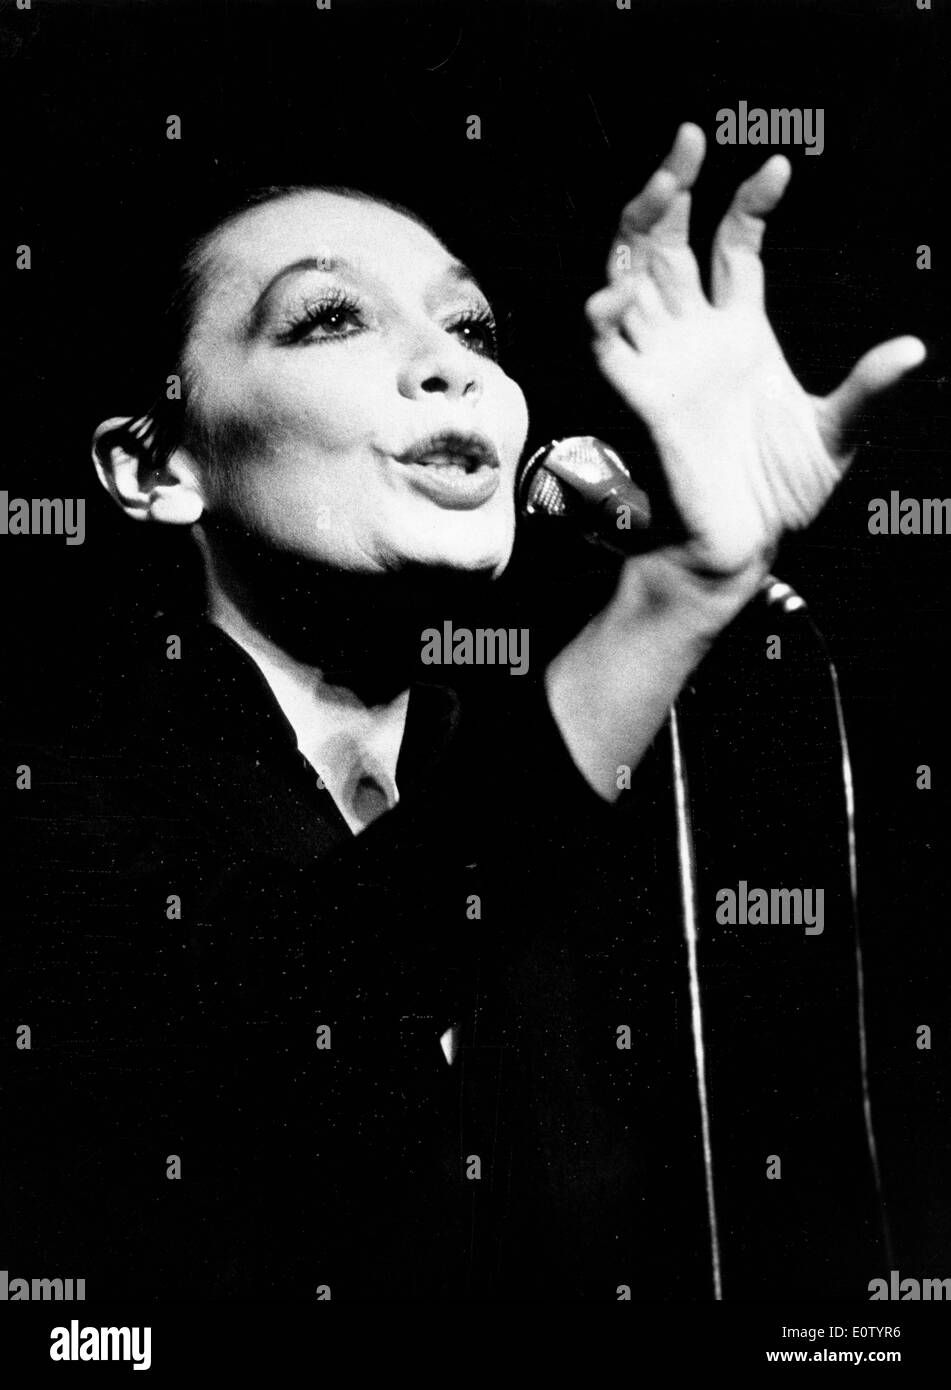 Singer Juliette Greco singing during a performance Stock Photo